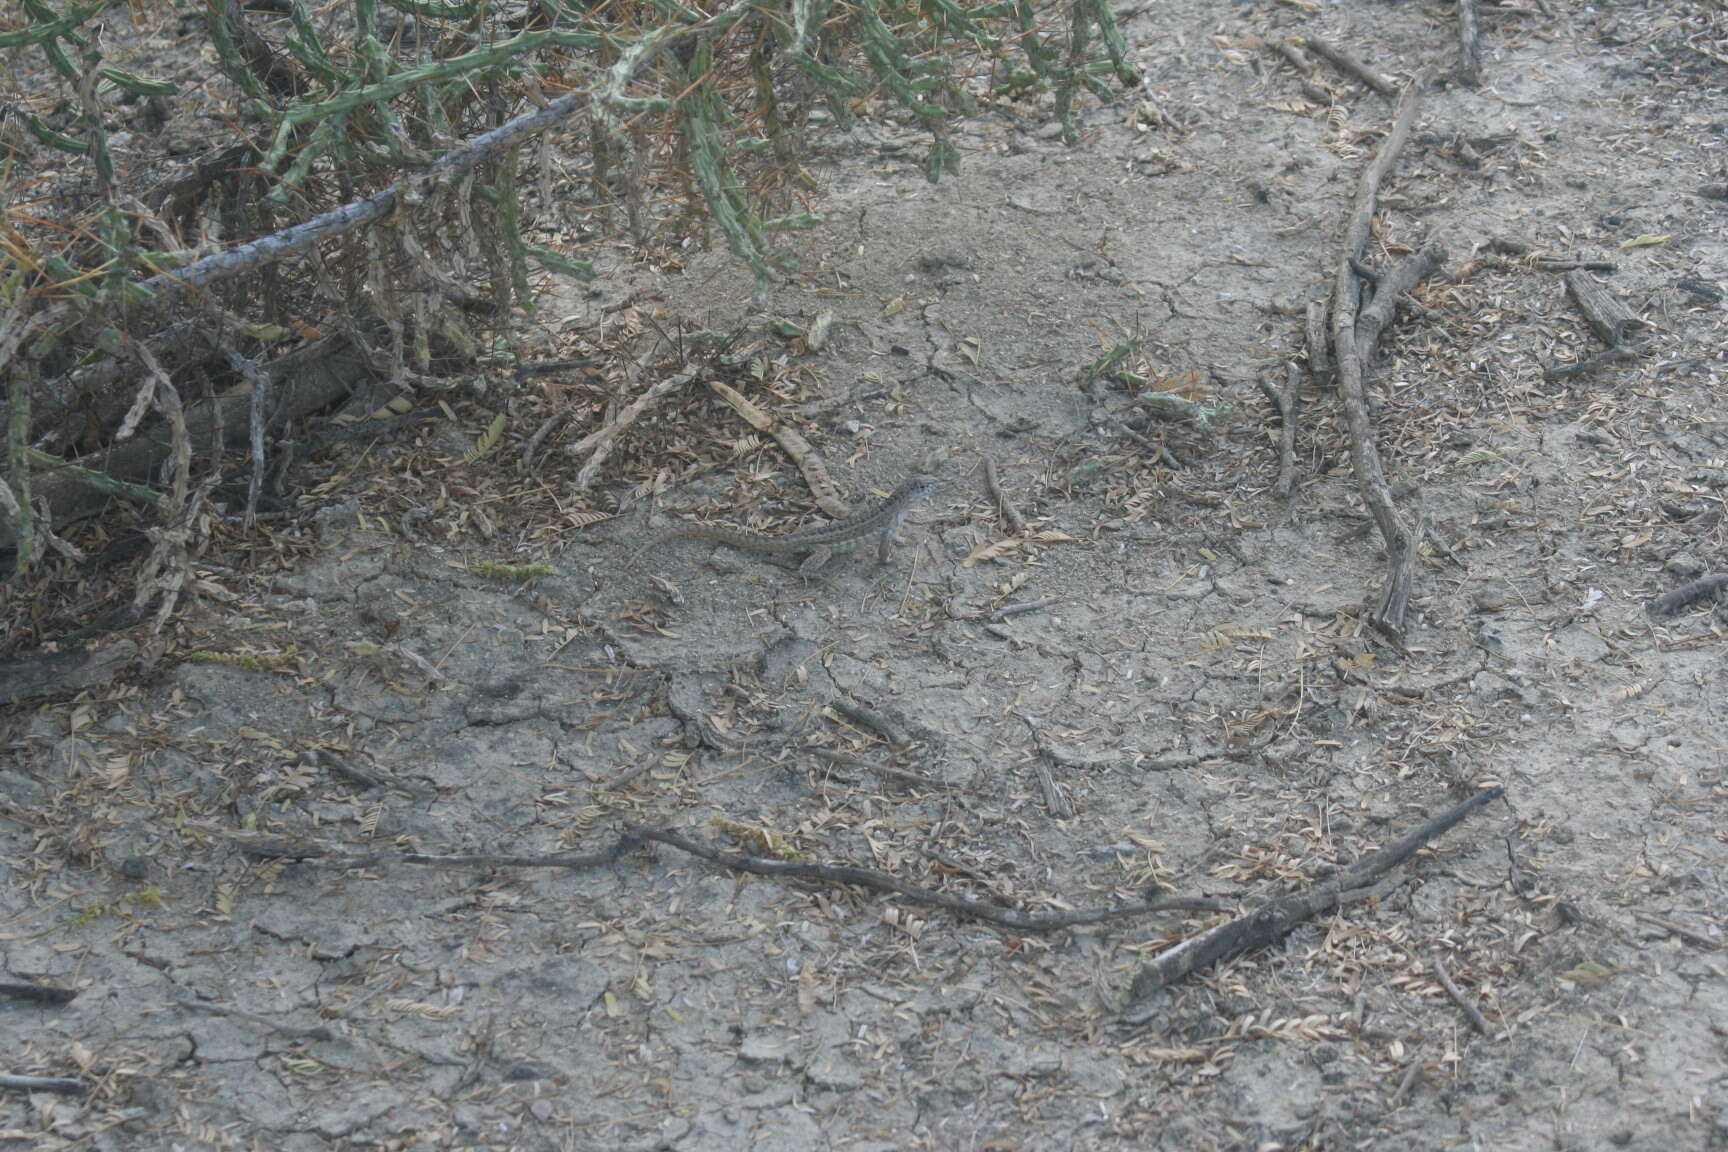 Image of Red-sided Curly-tailed Lizard